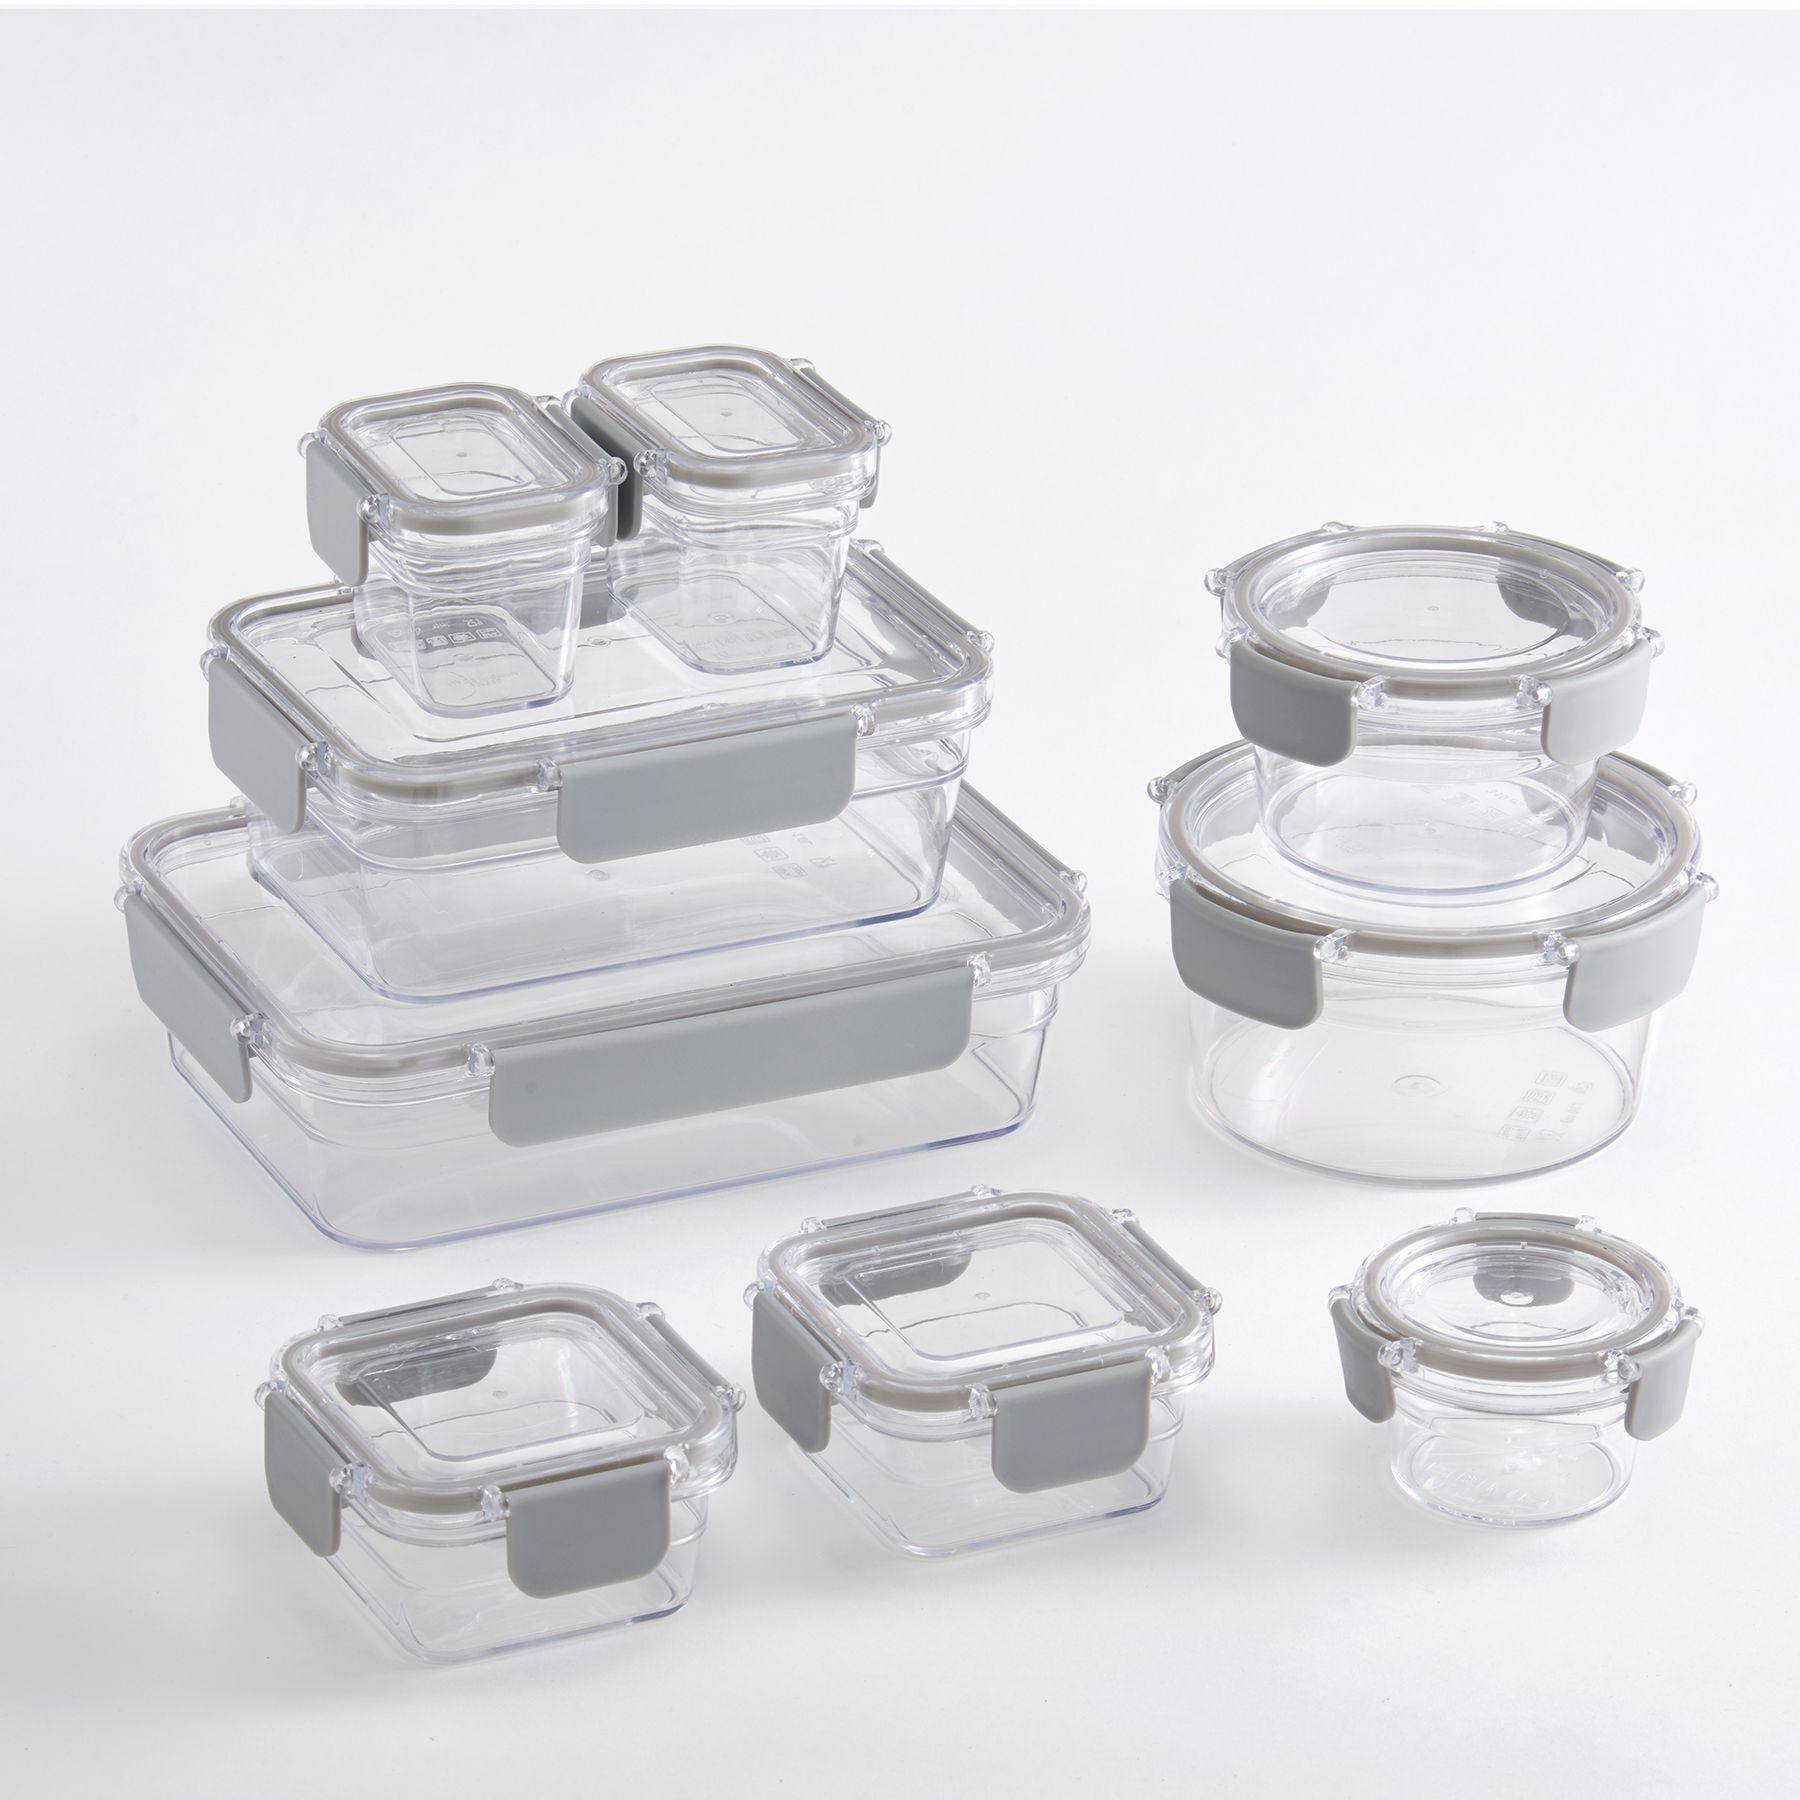 Mainstays Tritan Variety Set of 9 Food Storage Containers with Light Grey Clasps (18 Pc in Total) - image 2 of 5